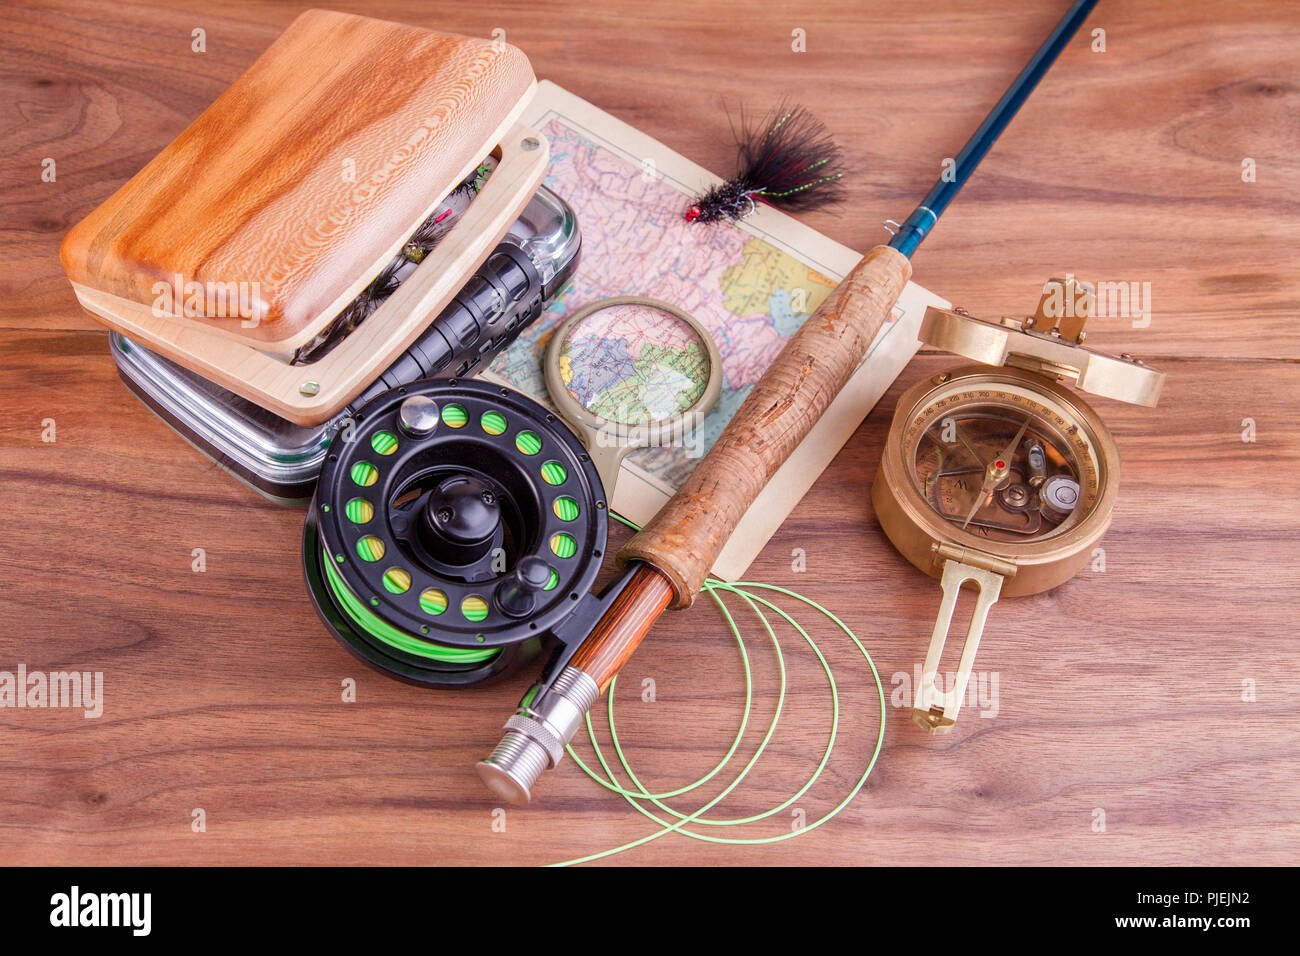 https://c8.alamy.com/comp/PJEJN2/fly-fishing-rod-with-a-coil-and-flies-lie-on-old-wooden-boards-PJEJN2.jpg